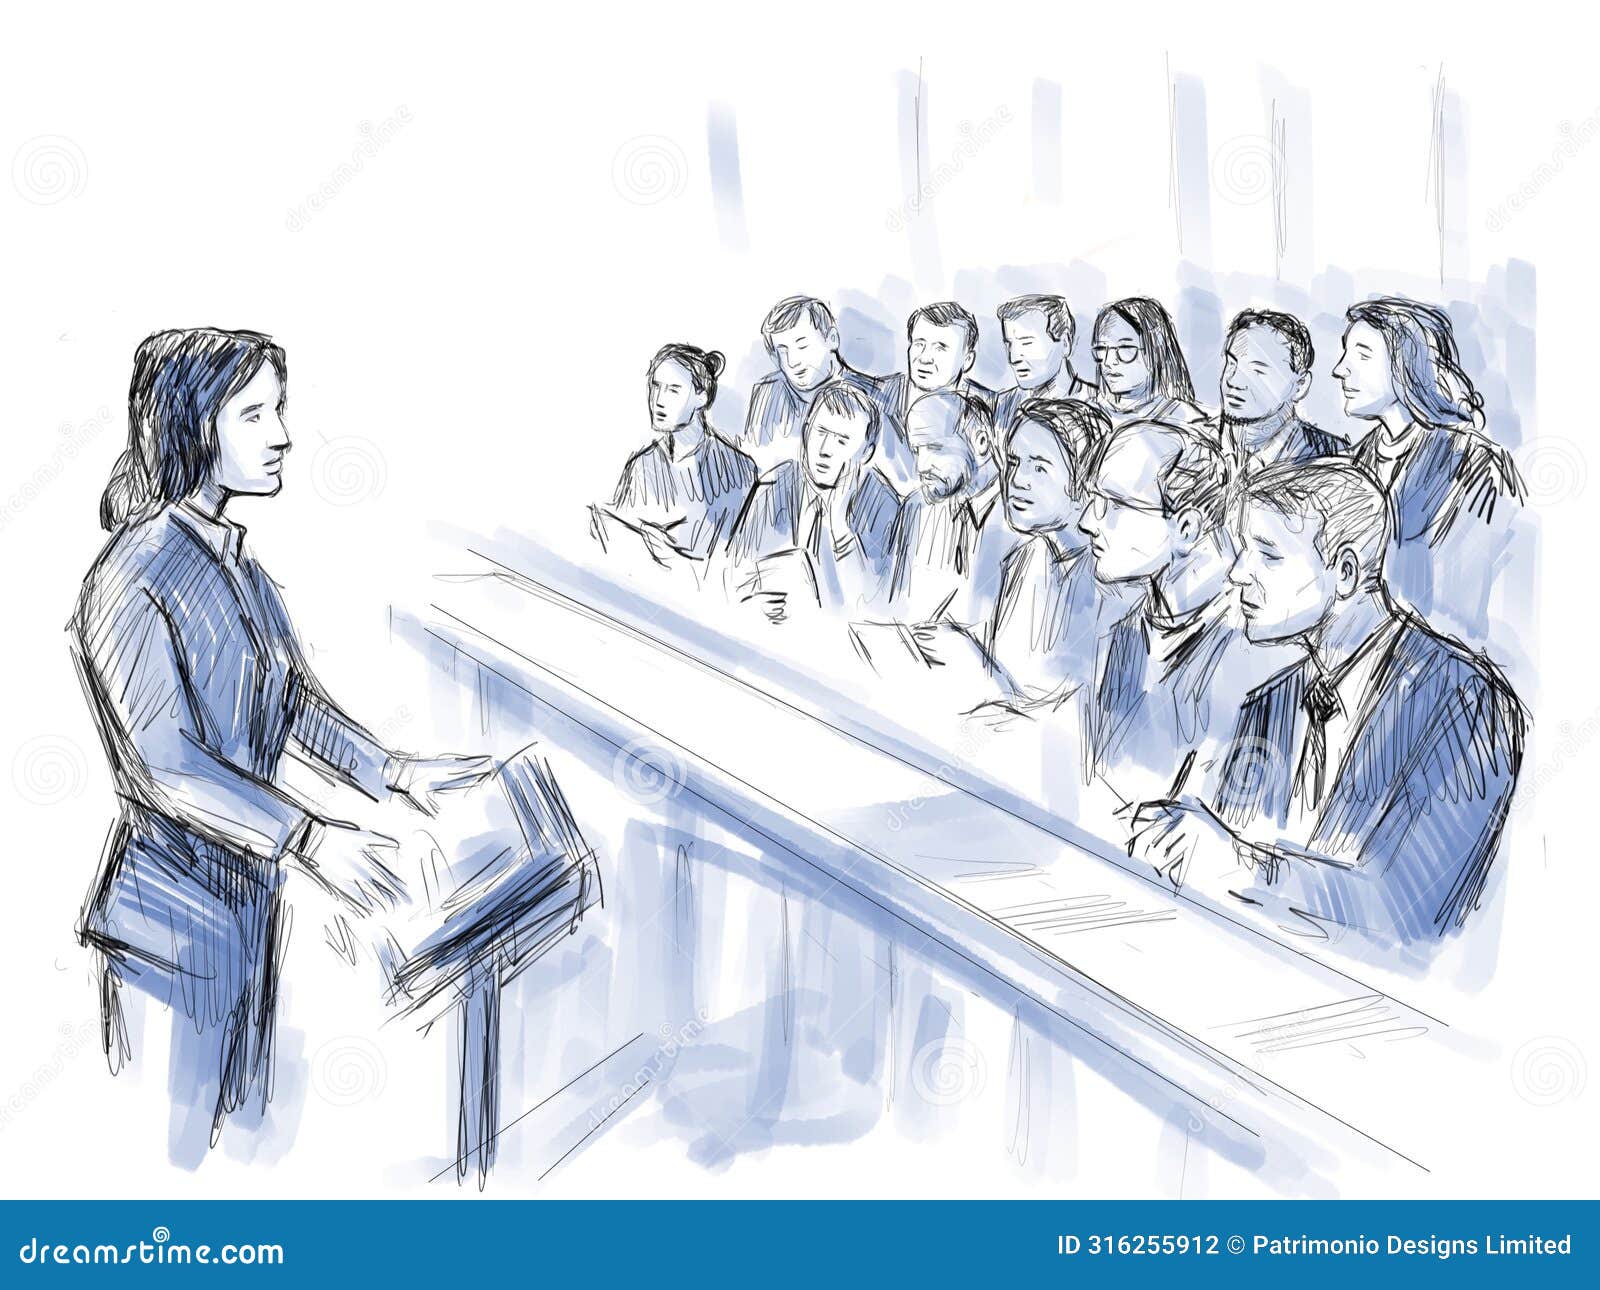 courtroom trial sketch showing lawyer of defendant plaintiff addressing jury in closing argument inside court of law